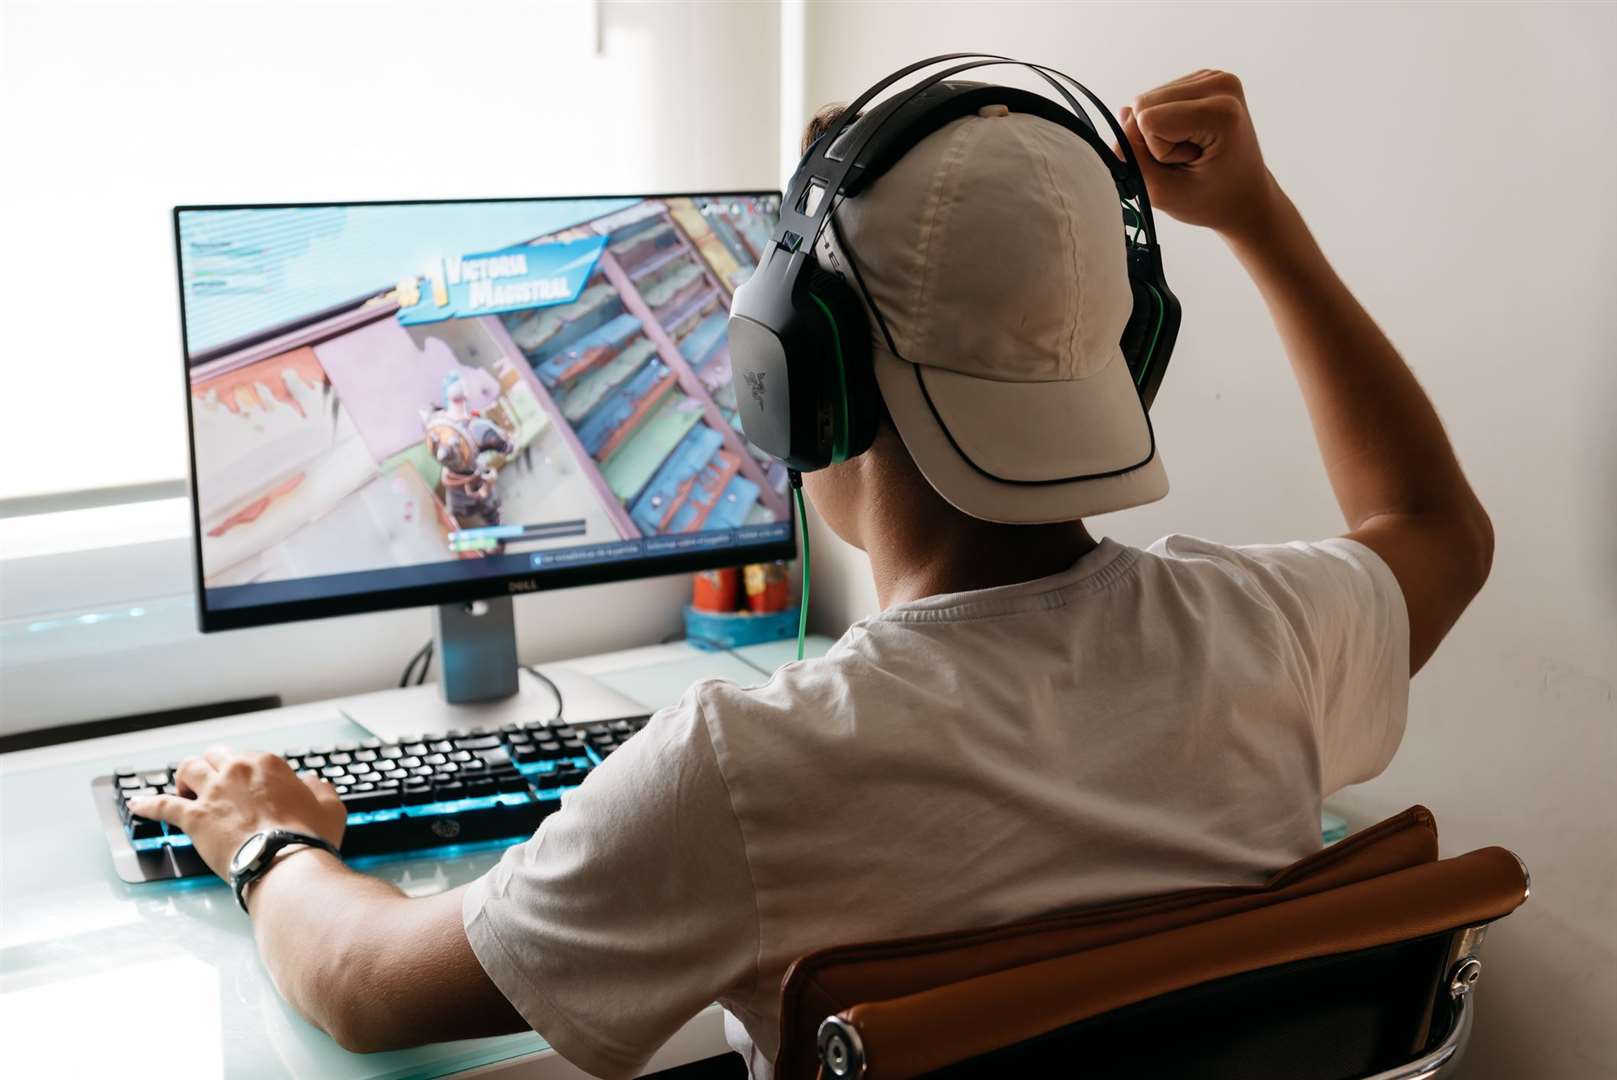 In 2019 the CMA launched an investigation into online gaming memberships